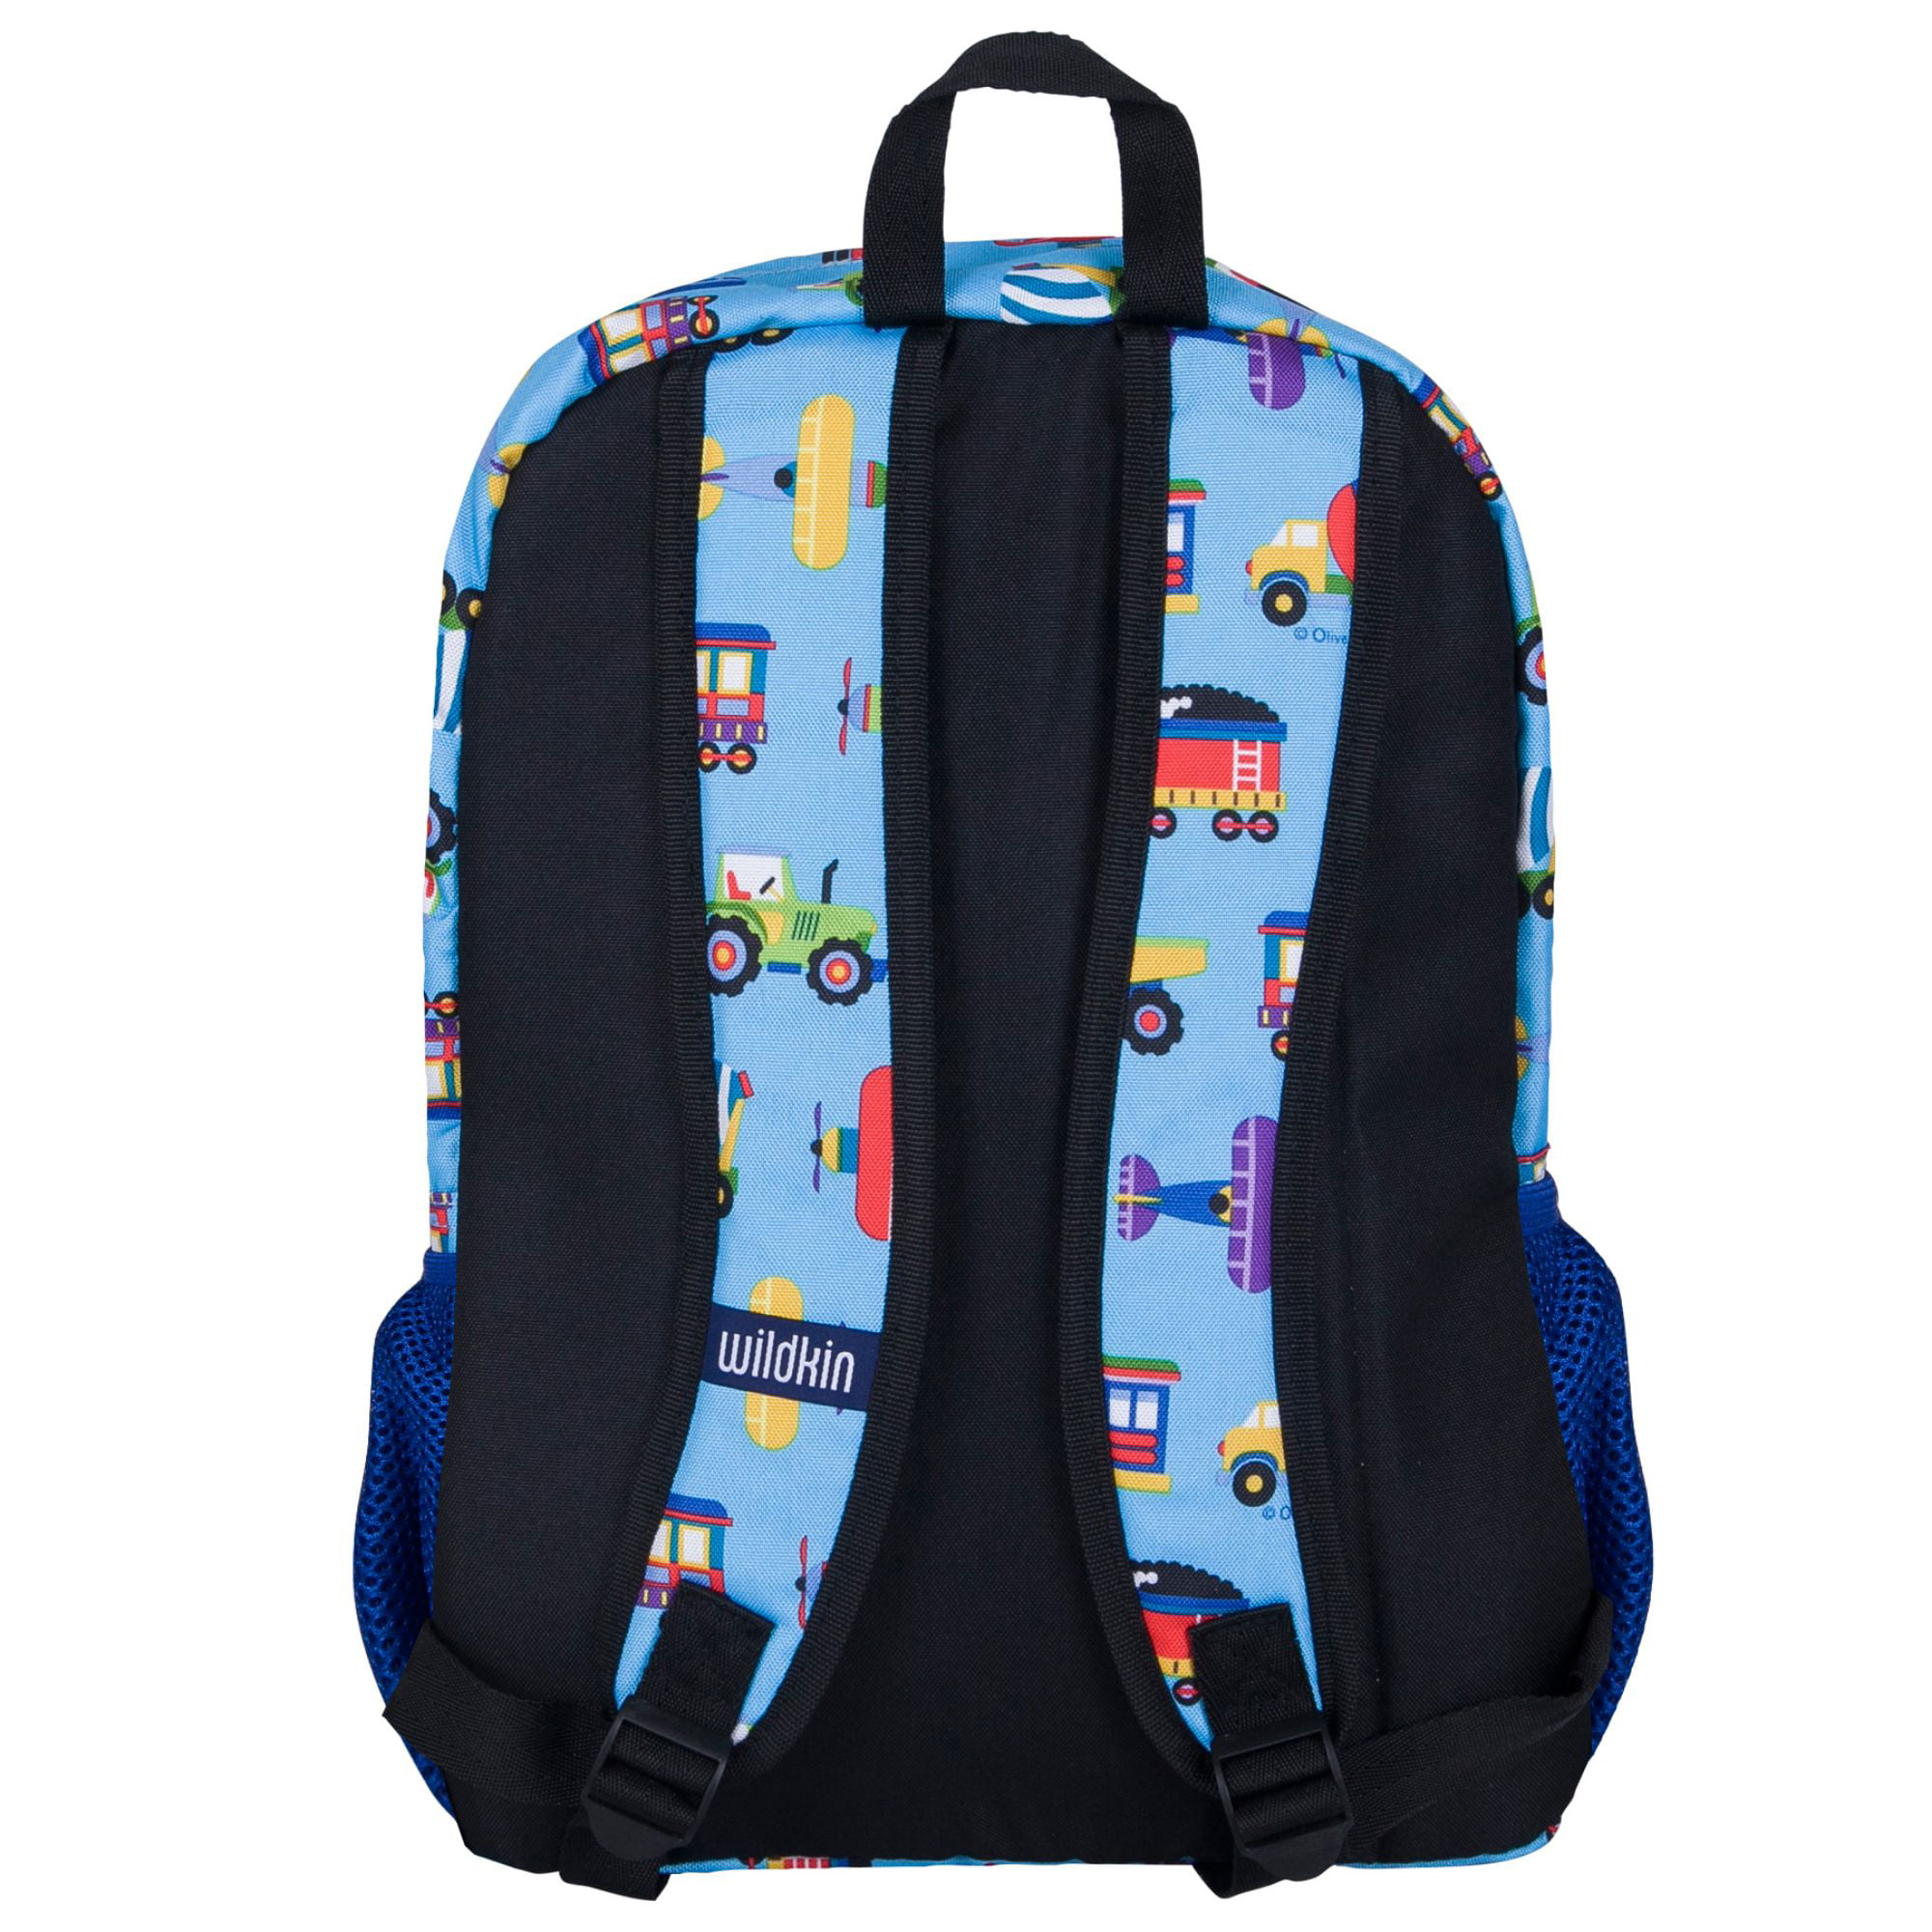 Wildkin Kids 16 Inch Backpack for Boys and Girls, Ideal Size for  Kindergarten, Elementary, and Middle School, Perfect for School and Travel,  600 Denie